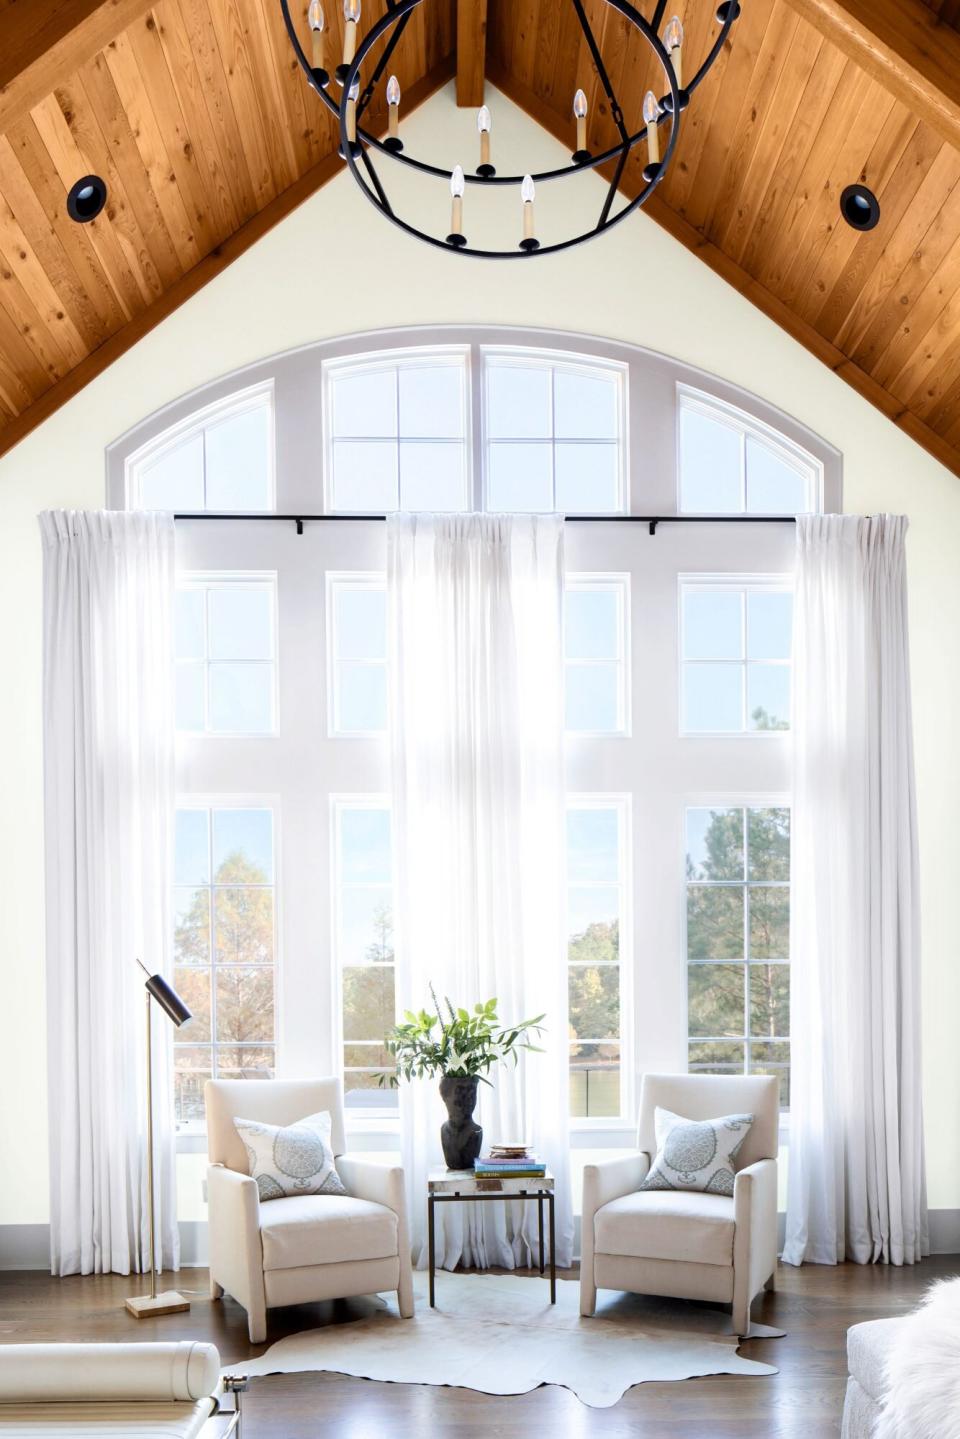 Cabin with White Walls and Floor to Ceiling Windows